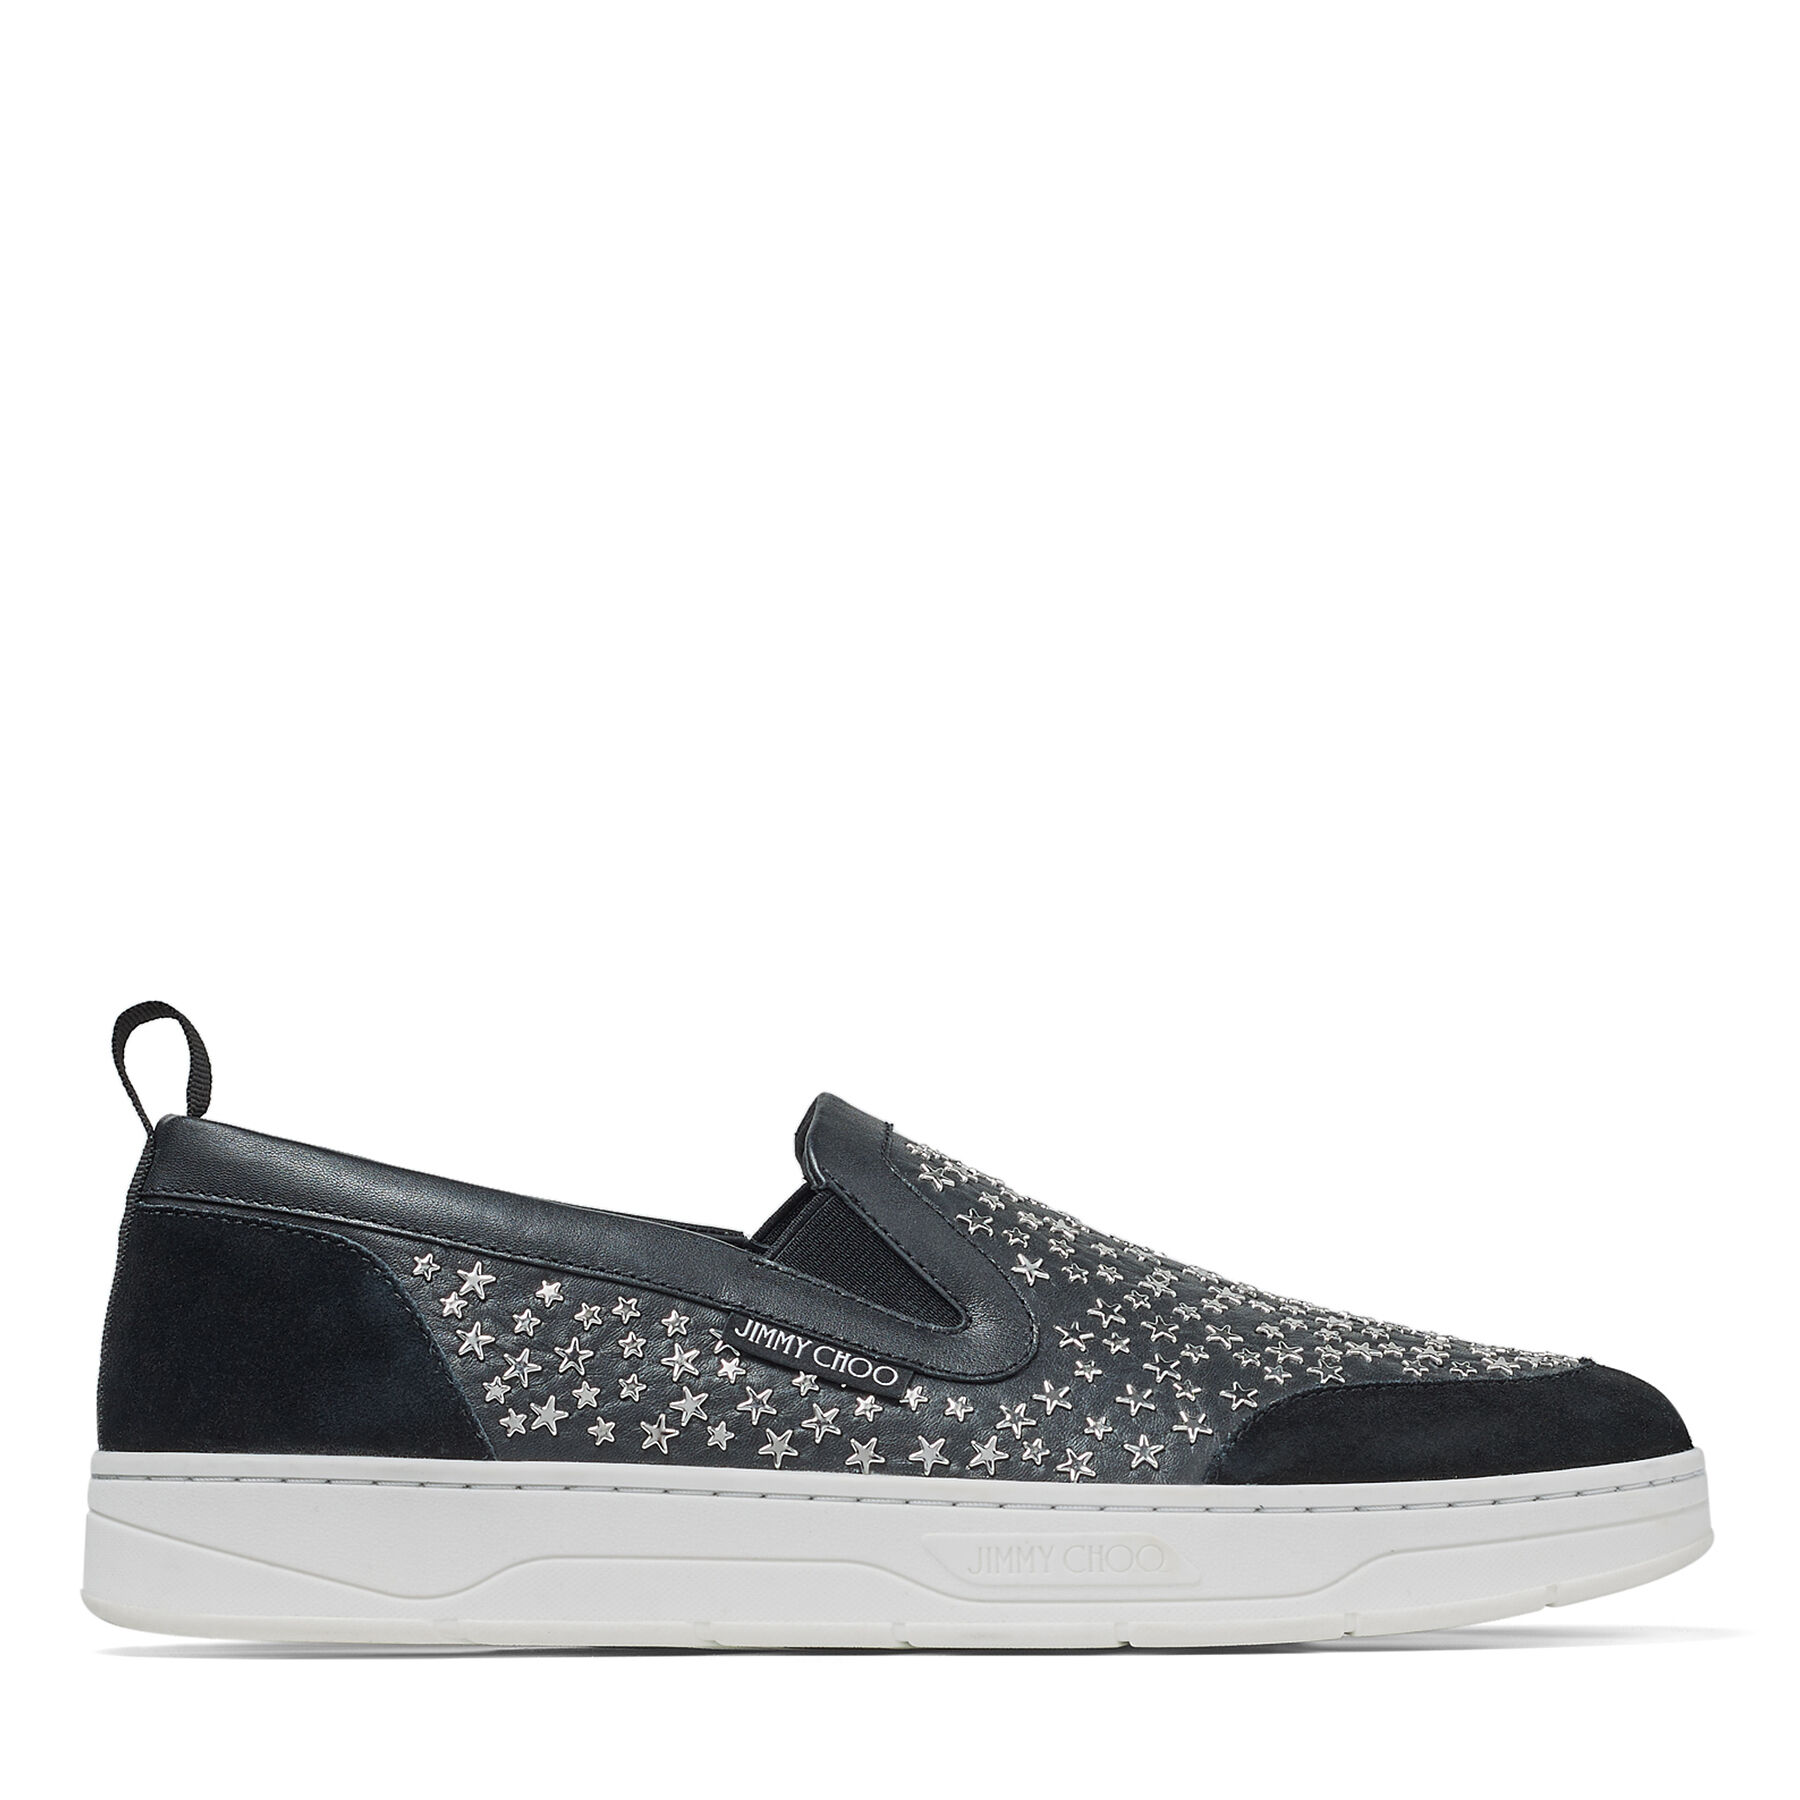 Black Calf Leather and Crosta Suede Slip-On Trainers with Star ...